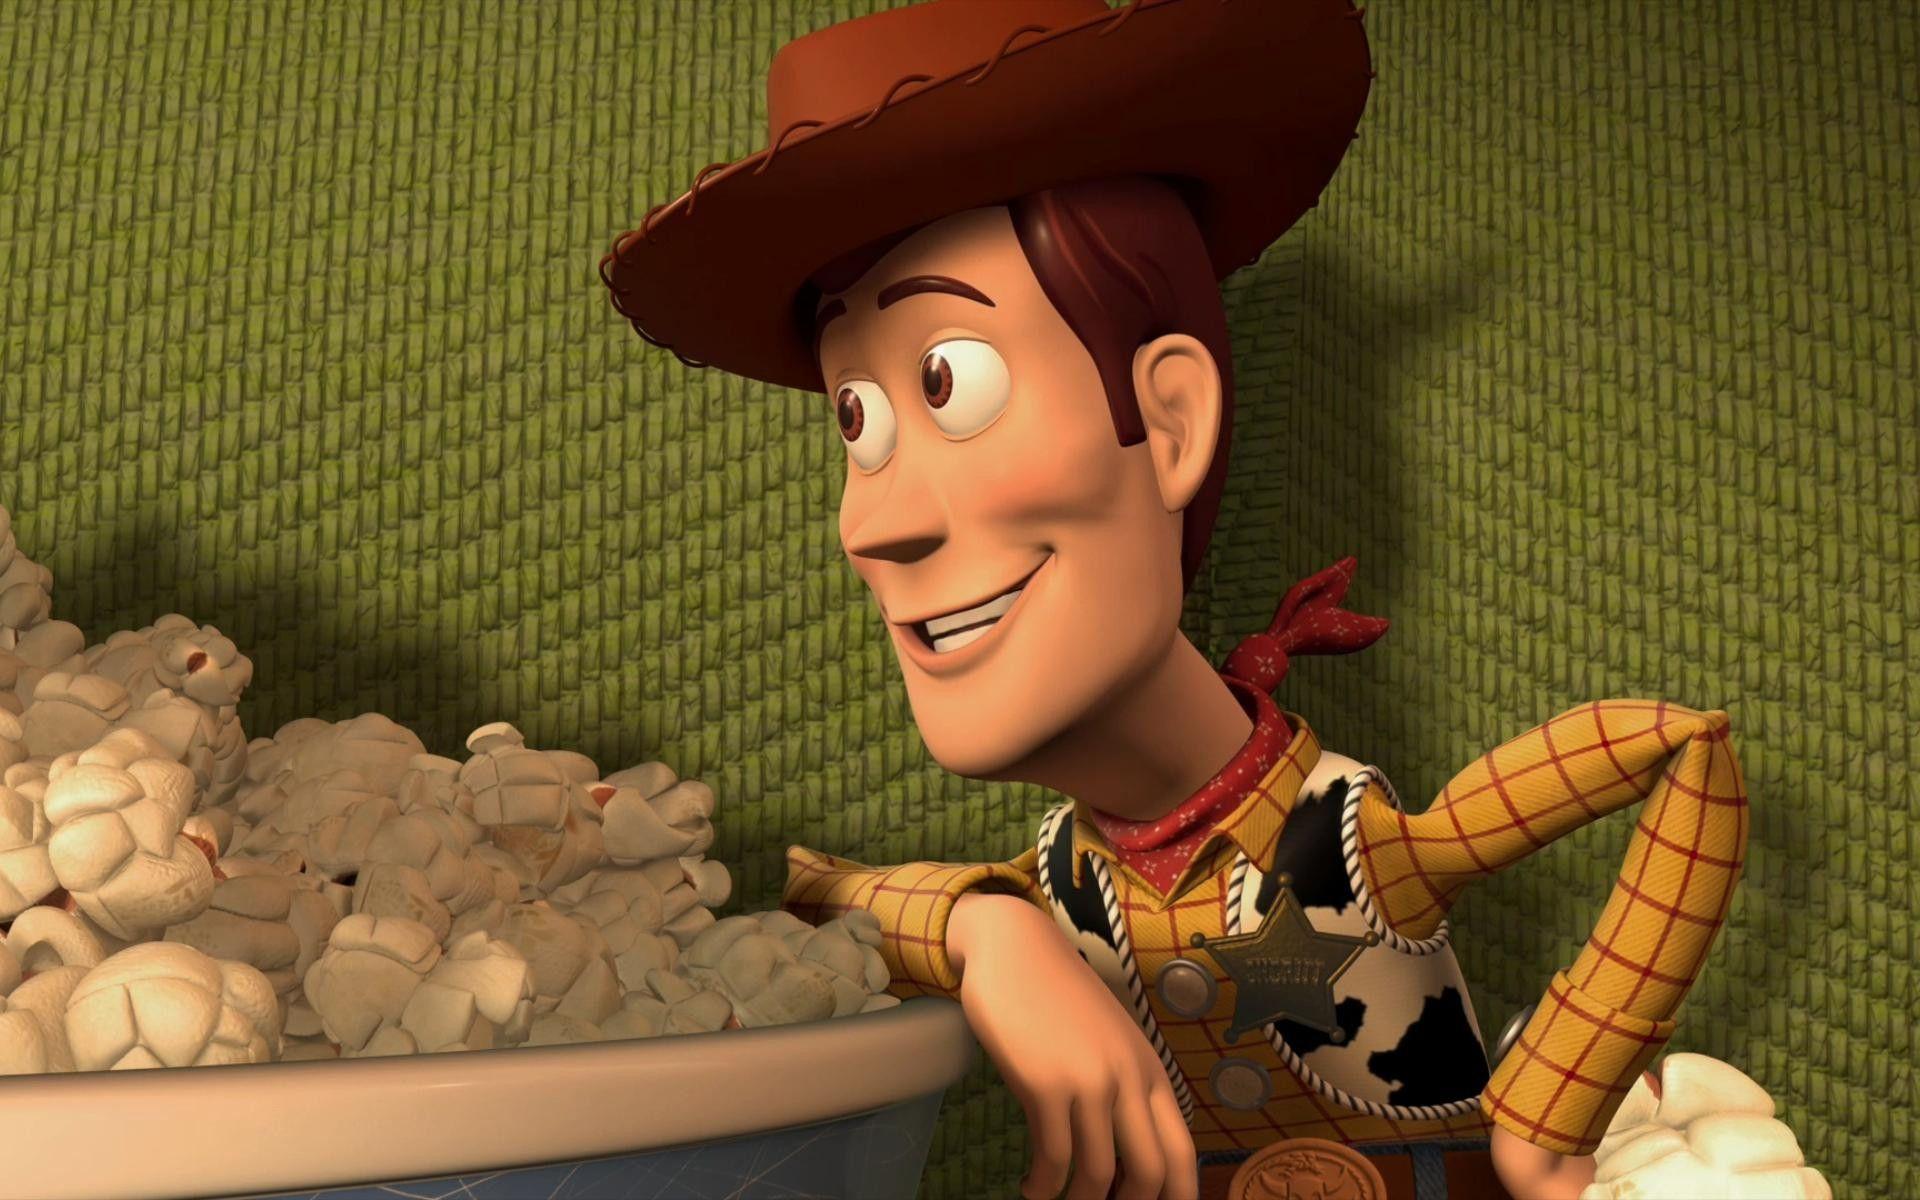 Top 300+ Wallpaper iPhone Toy Story For Disney fans